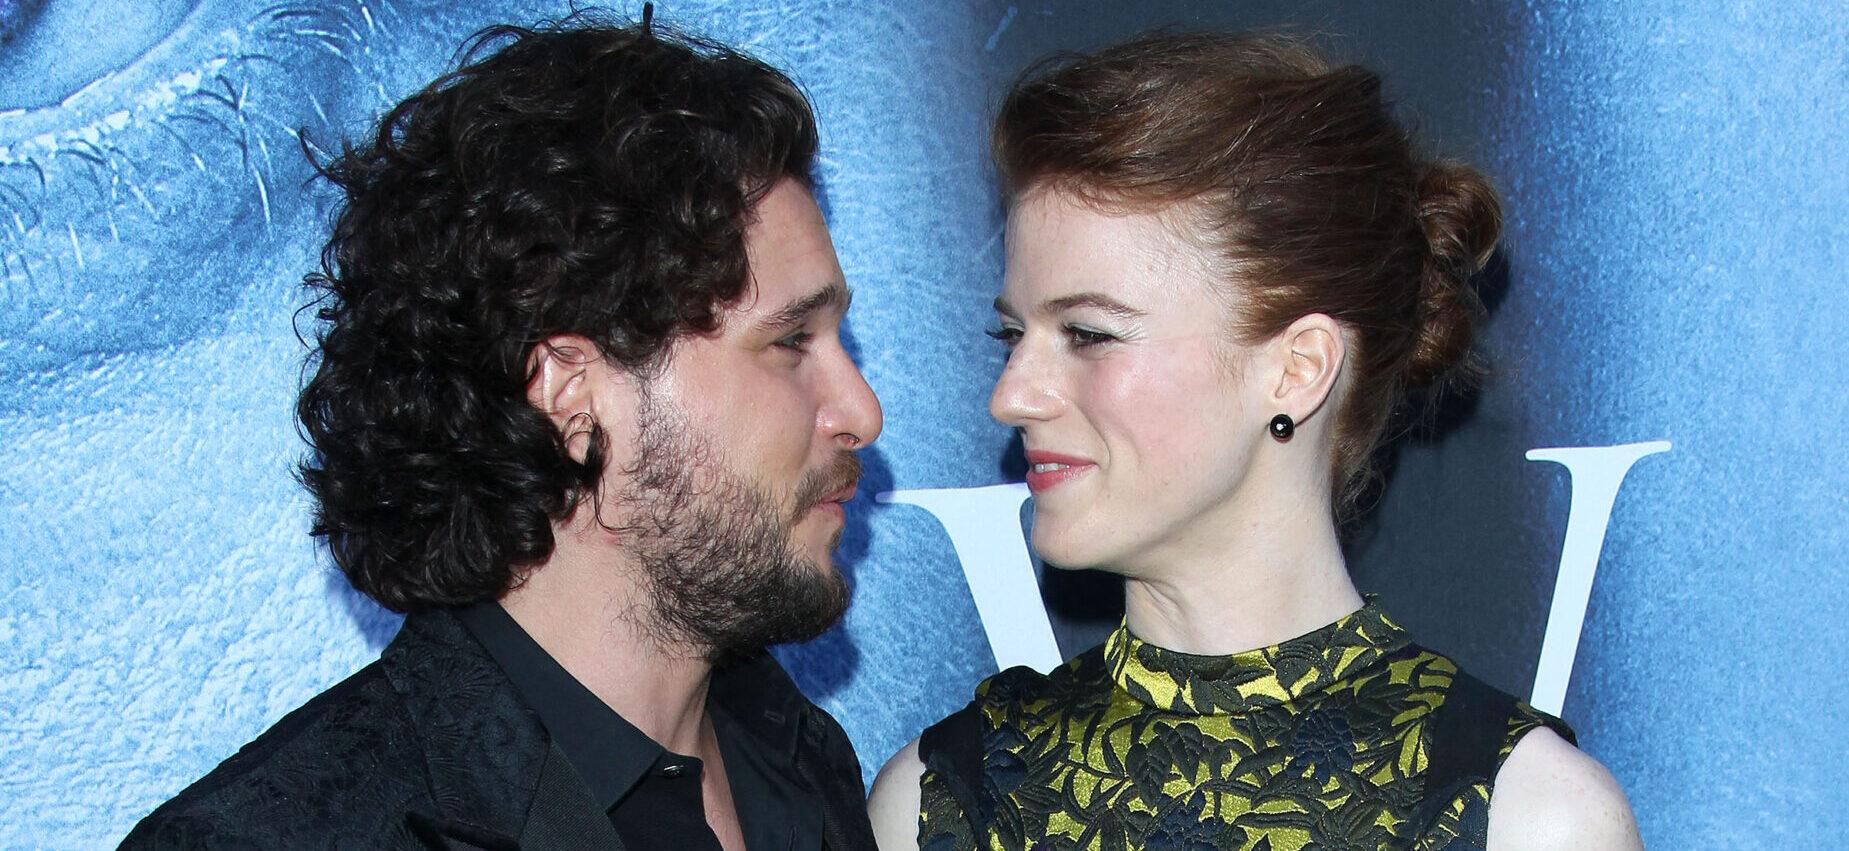 ‘GOT’ Star Kit Harington Has Welcomed His Second Child With His Wife, Rose Leslie